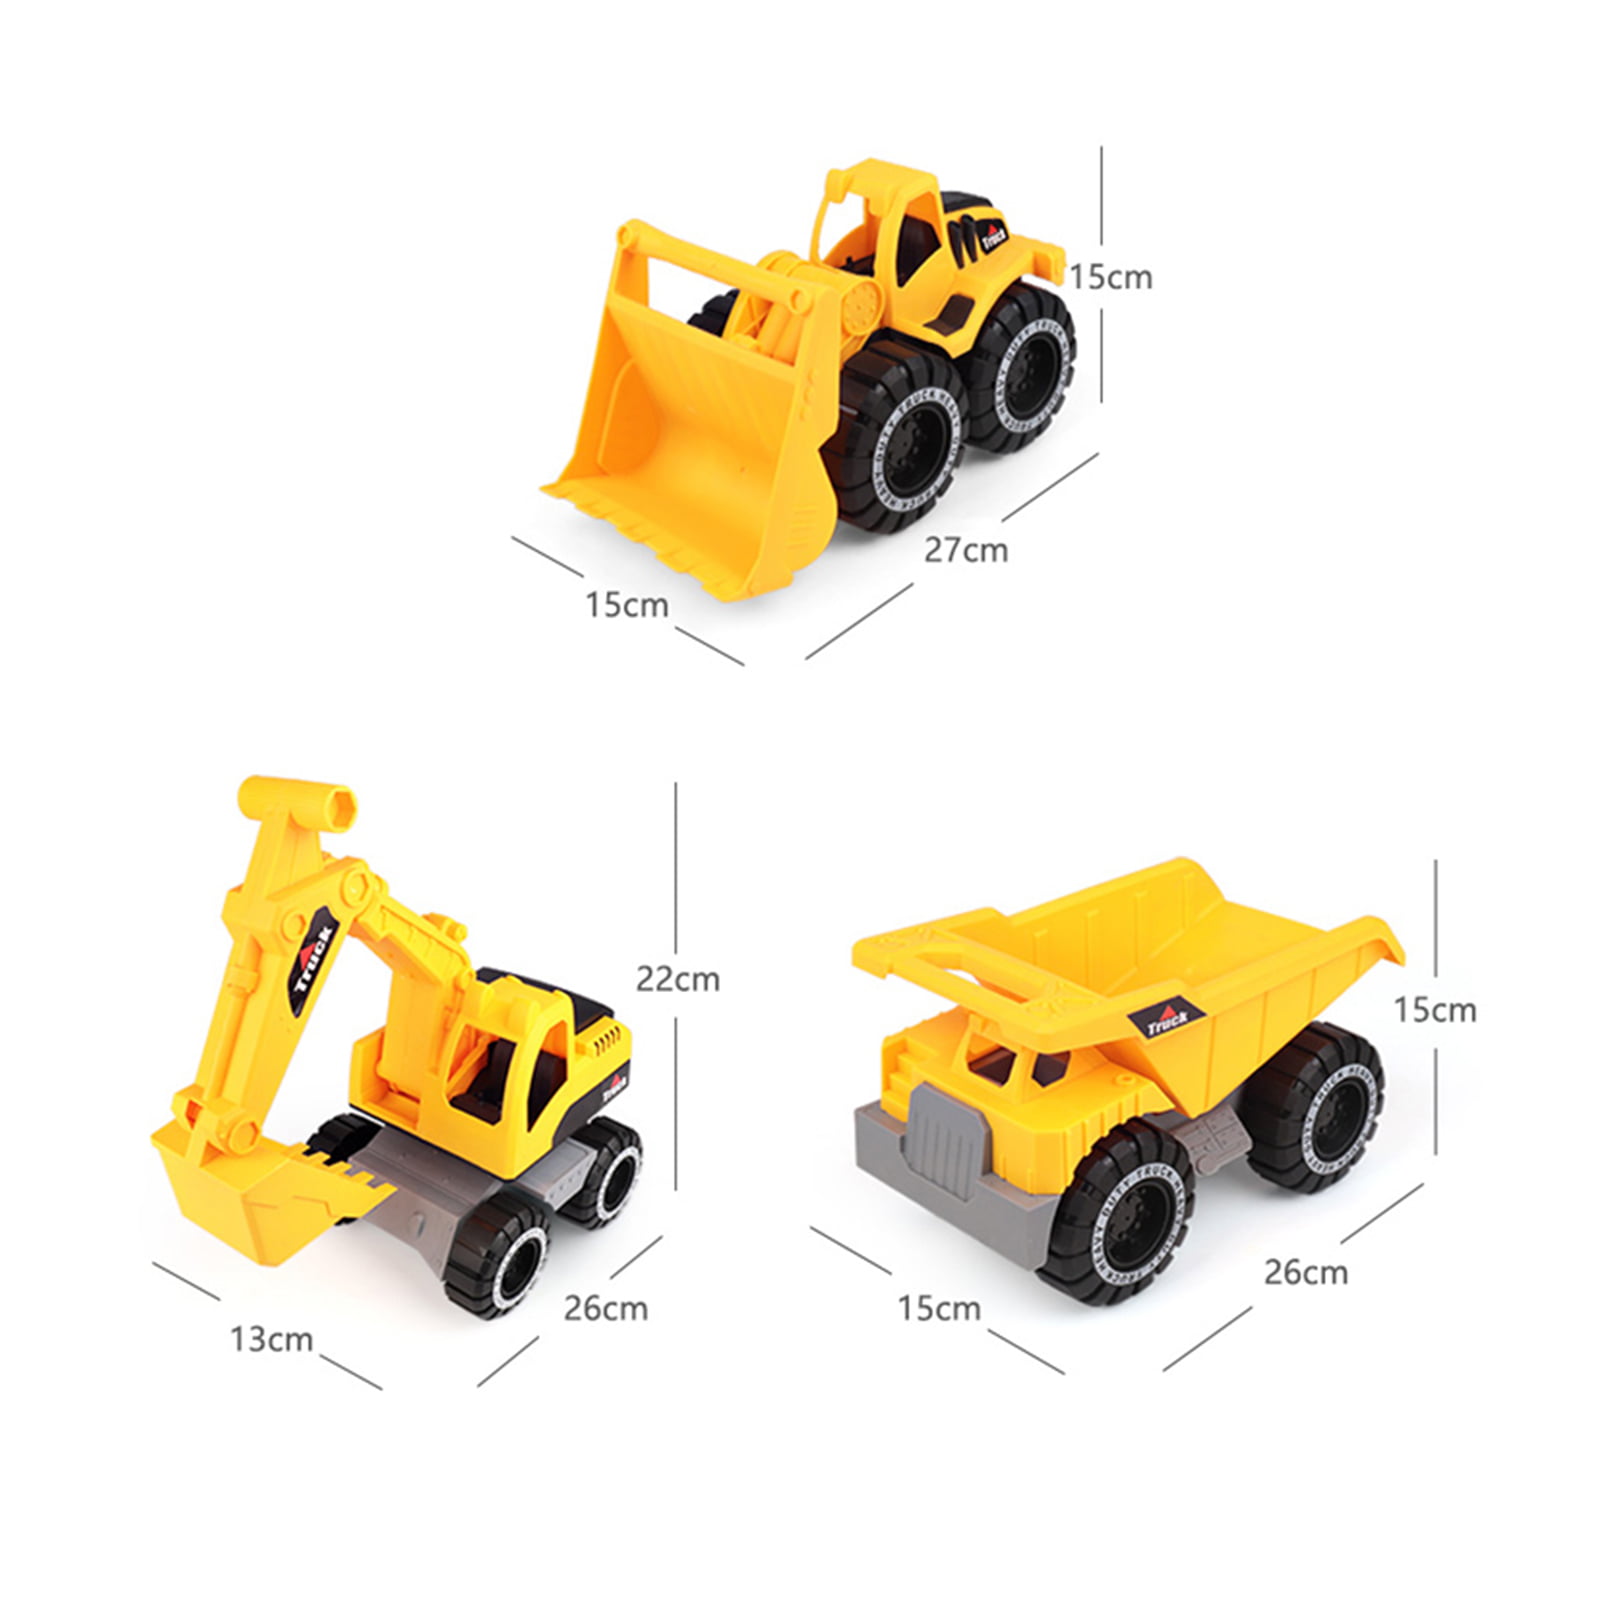 Early Development Excavator Kids 3pcs 4 HAPISIMI Vehicle Toys Radlader Gift for 3 Educational Dump Truck 5 Construction Site Play Set 6 Year Olds Toddlers Boys Learning 